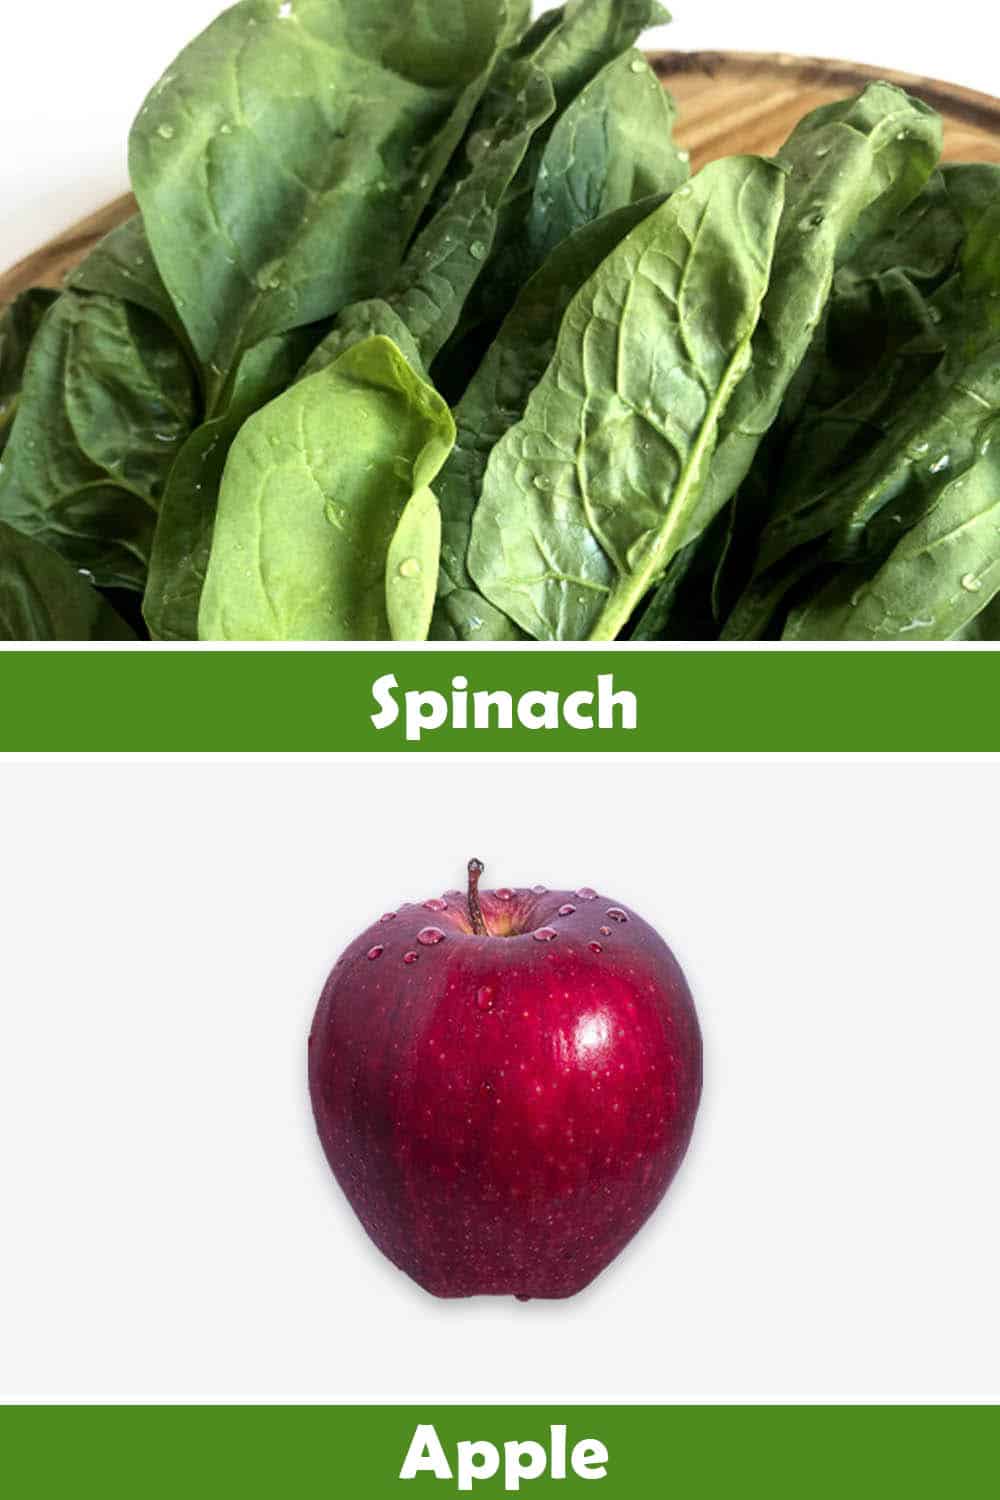 SPINACH AND APPLE